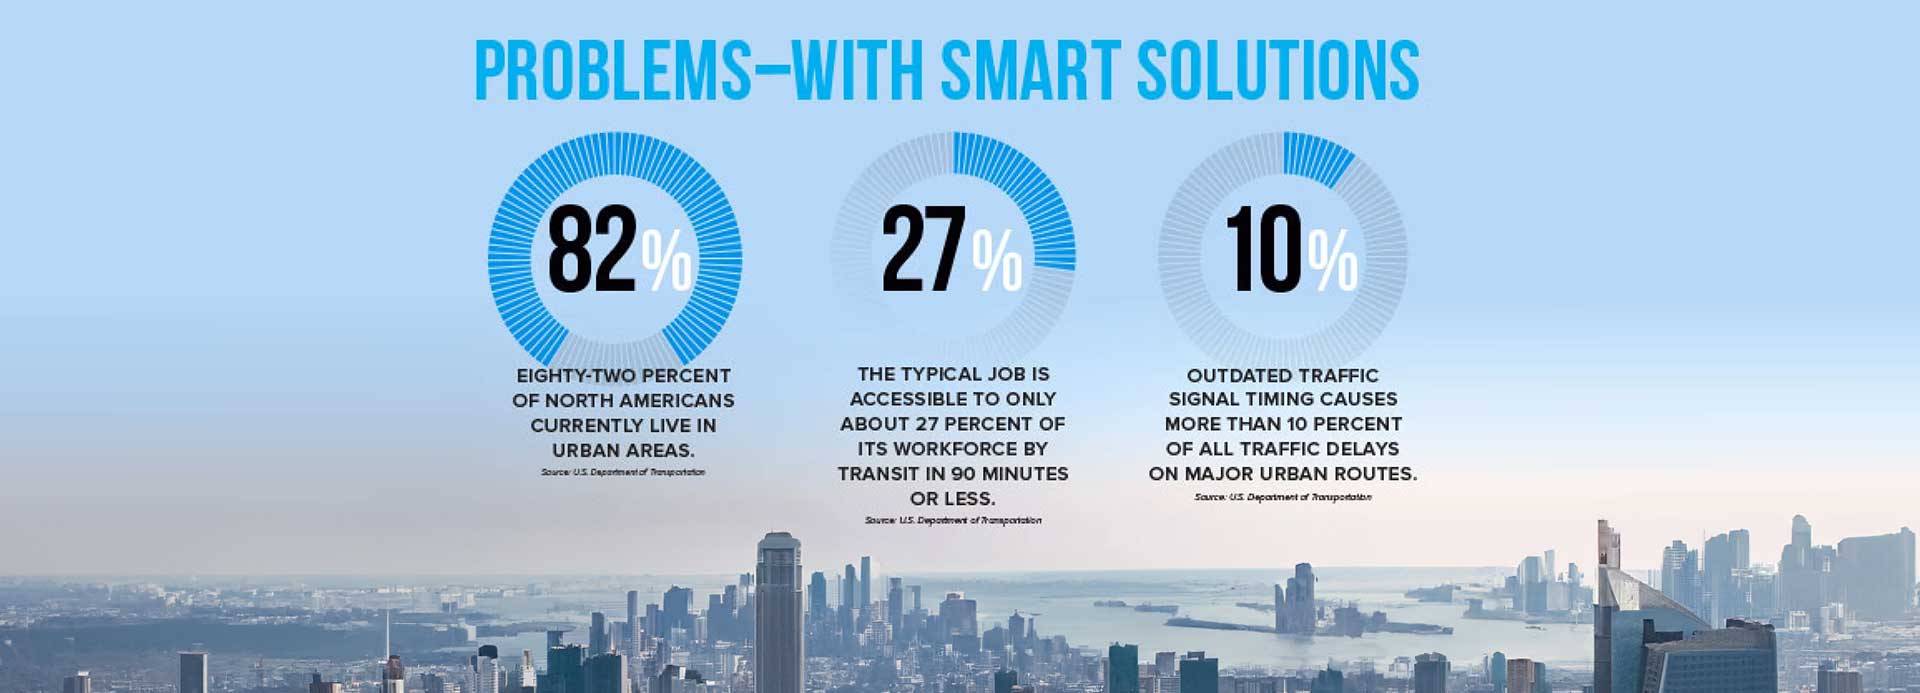 Problems with Smart Solutions